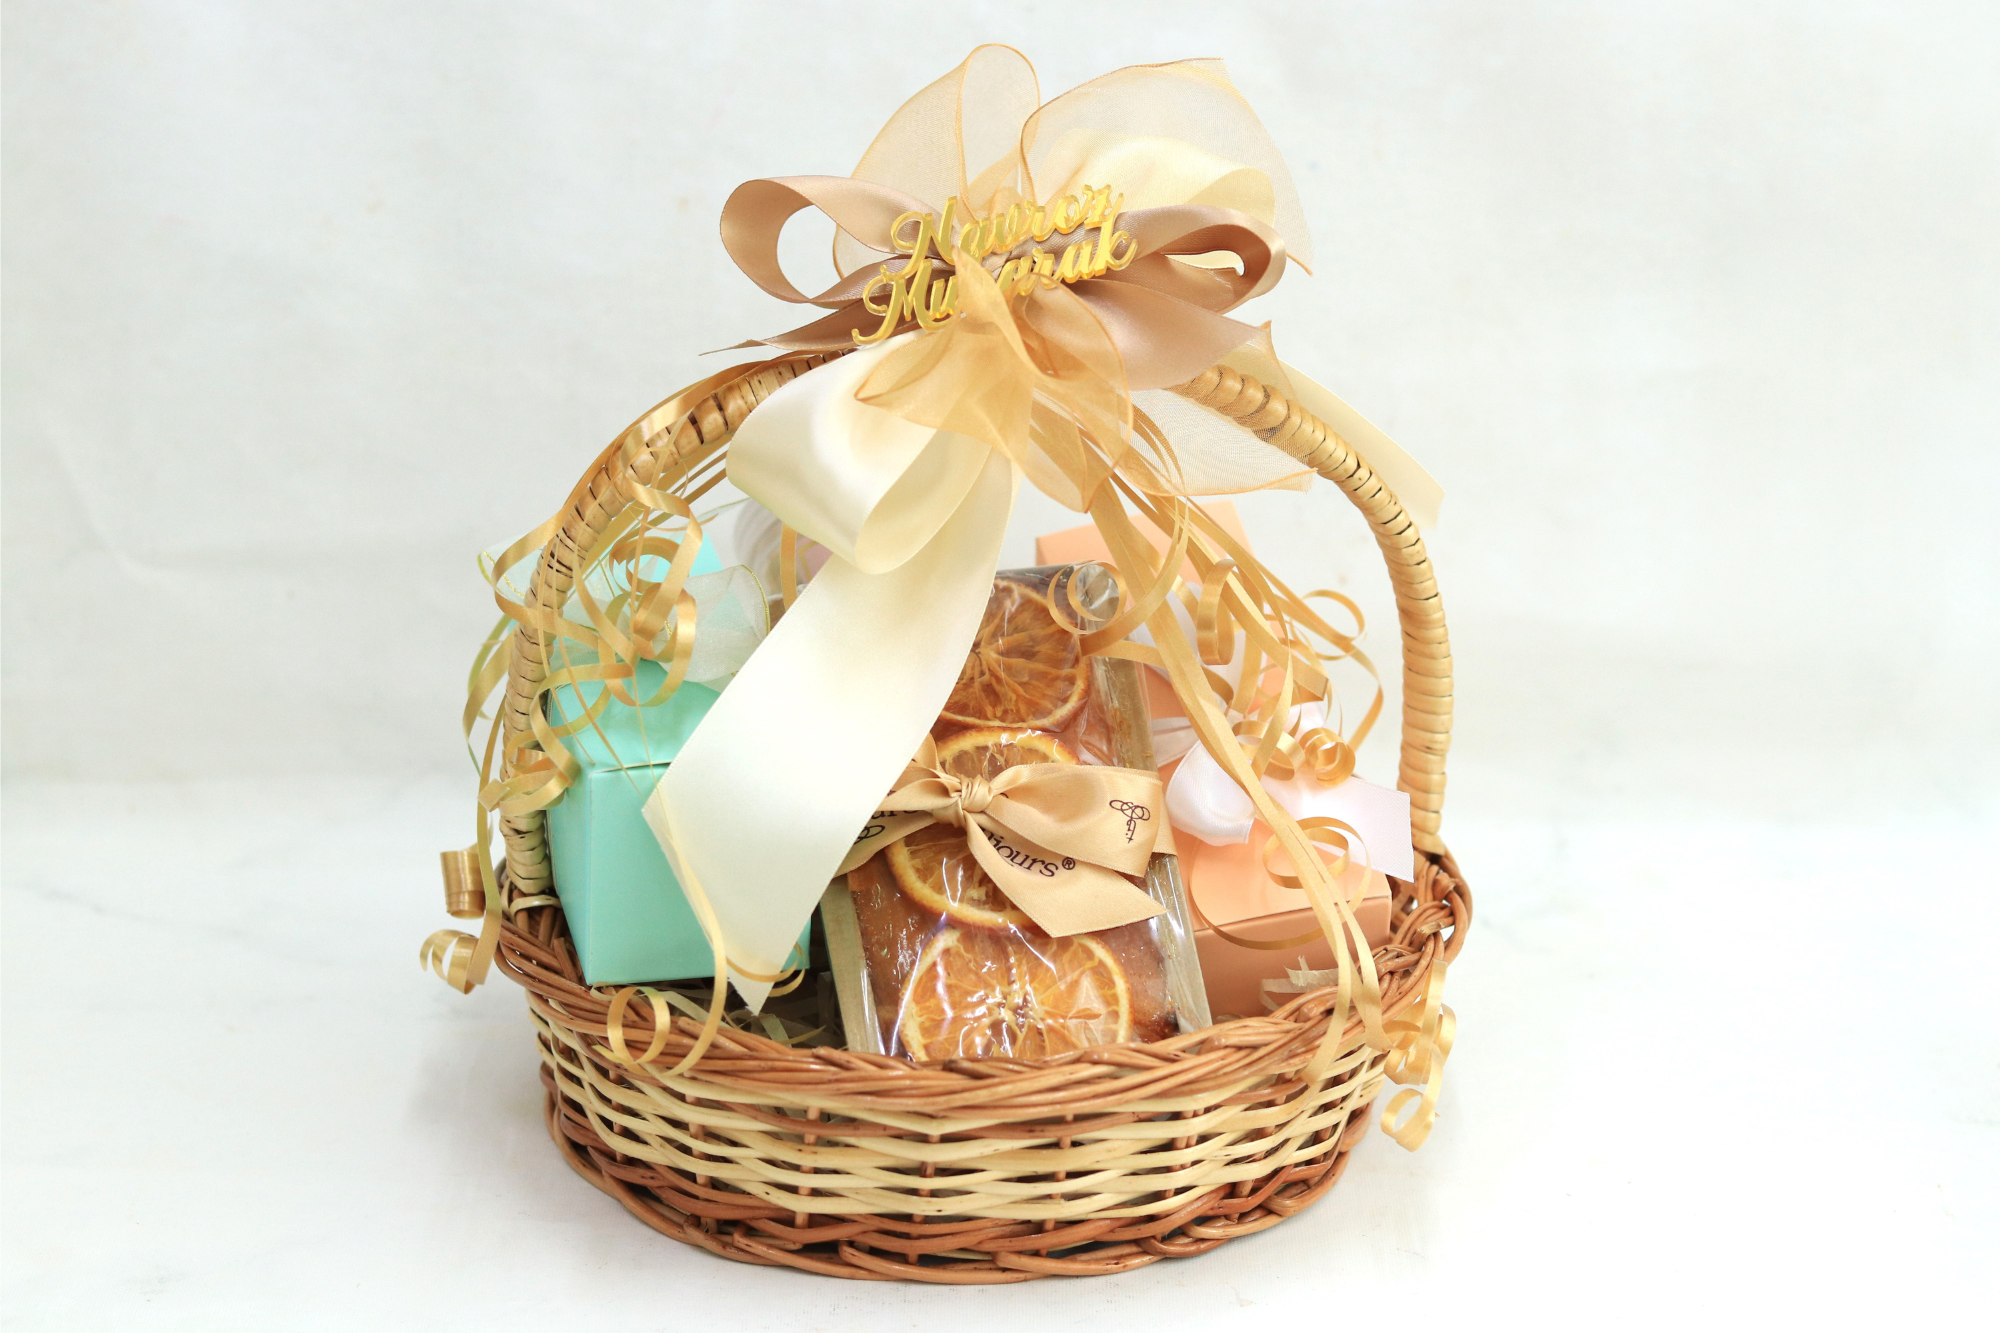 How to Make a Gift Basket in 7 Easy Steps - Back Porch Bliss